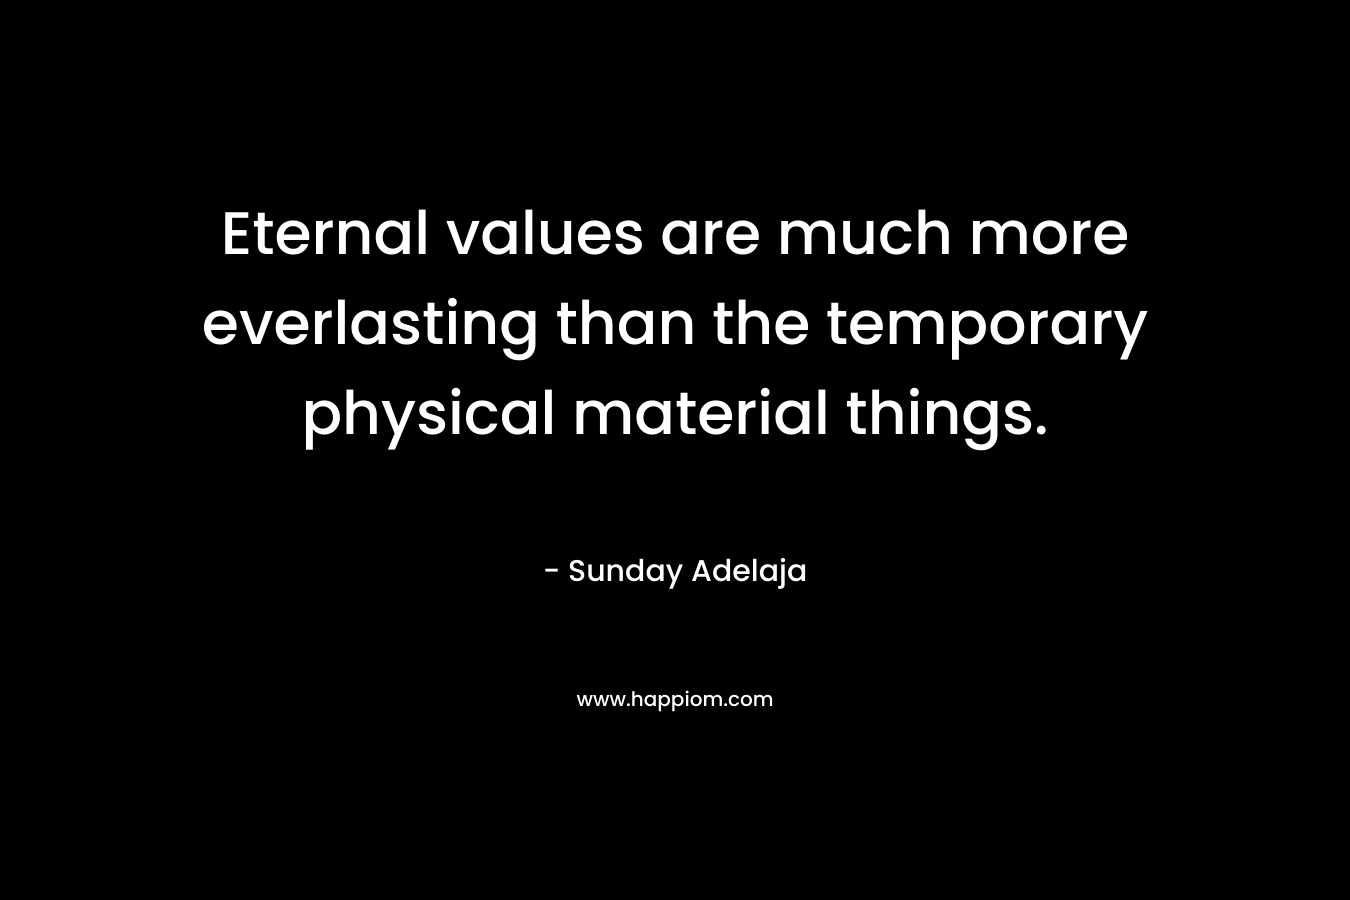 Eternal values are much more everlasting than the temporary physical material things. – Sunday Adelaja